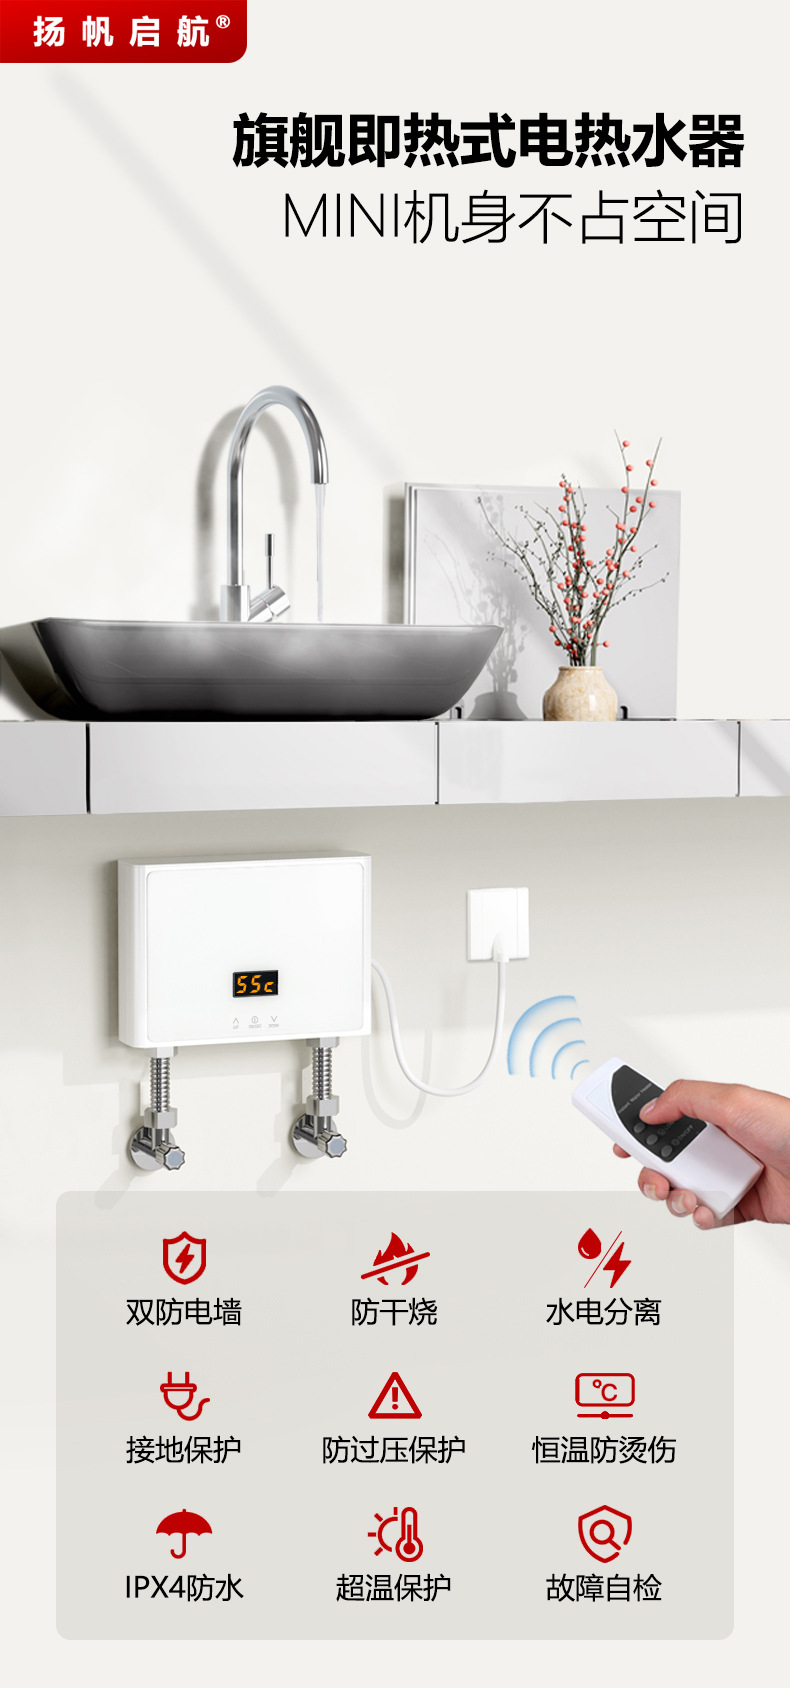 Instantaneous Water Heater, Kitchen, Quick Water Heating, Household, Small Constant Temperature, Small Power Electric Water Heater, 110V